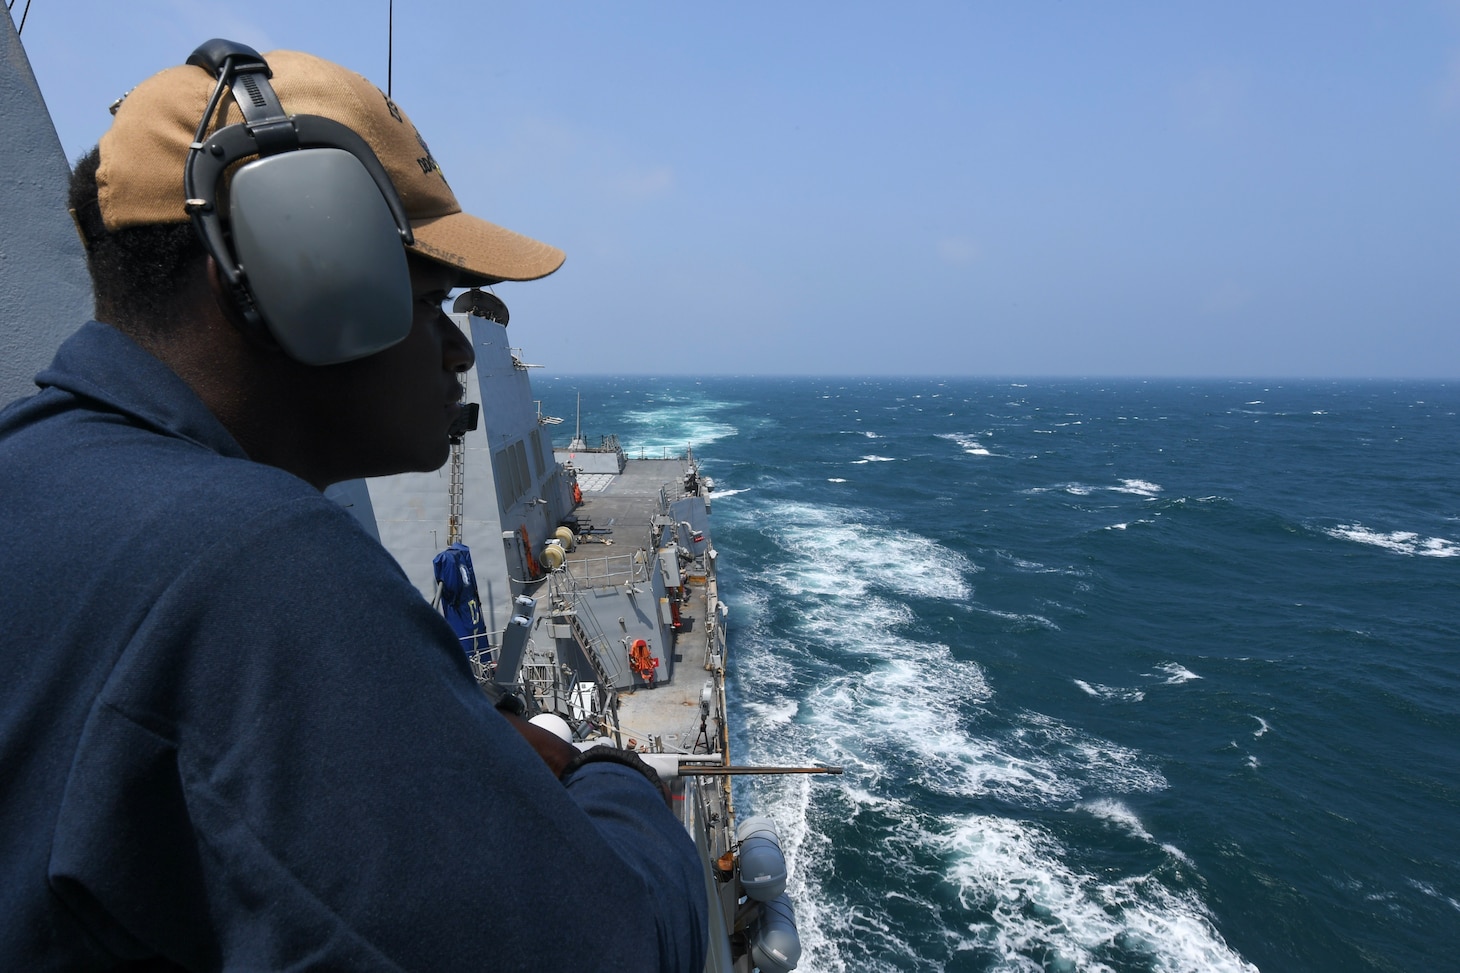 240508-N-IM467-1017
TAIWAN STRAIT (May 8, 2024) Seaman Gary Beckles, from Laurel, Maryland, stands port lookout aboard the Arleigh Burke-class guided-missile destroyer USS Halsey (DDG 97) during routine underway operations while transiting through the Taiwan Strait, May 8. Halsey is forward-deployed and assigned to Destroyer Squadron (DESRON) 15, the Navy’s largest DESRON and the U.S. 7th Fleet’s principal surface force. (U.S. Navy photo by Mass Communication Specialist 3rd class Ismael Martinez)